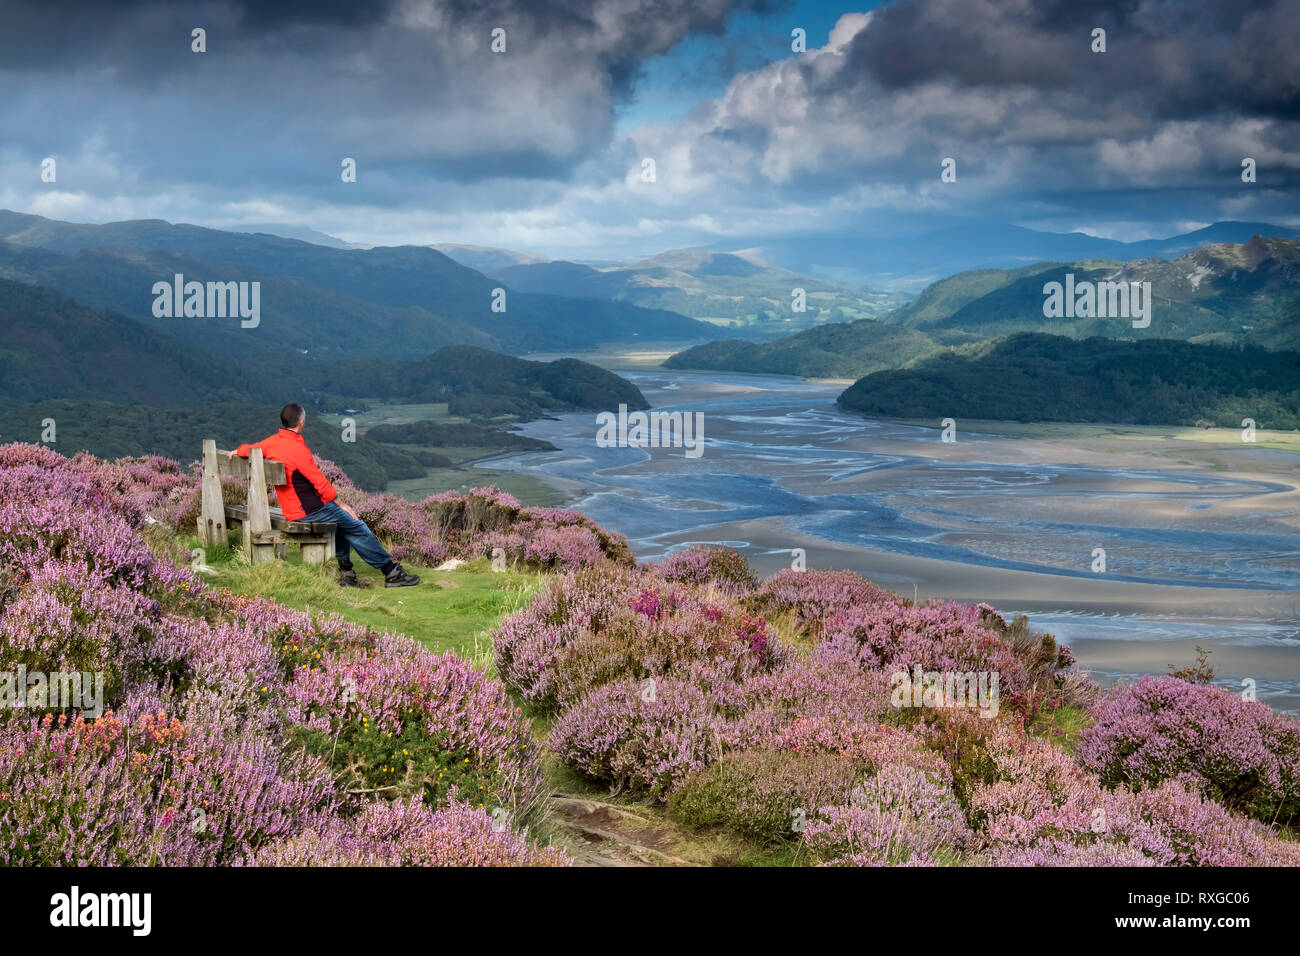 The Mawddach Estuary viewed from Panorama Walk in summer, Snowdonia National Park, Gwynedd, North Wales, UK MODEL RELEASED Stock Photo